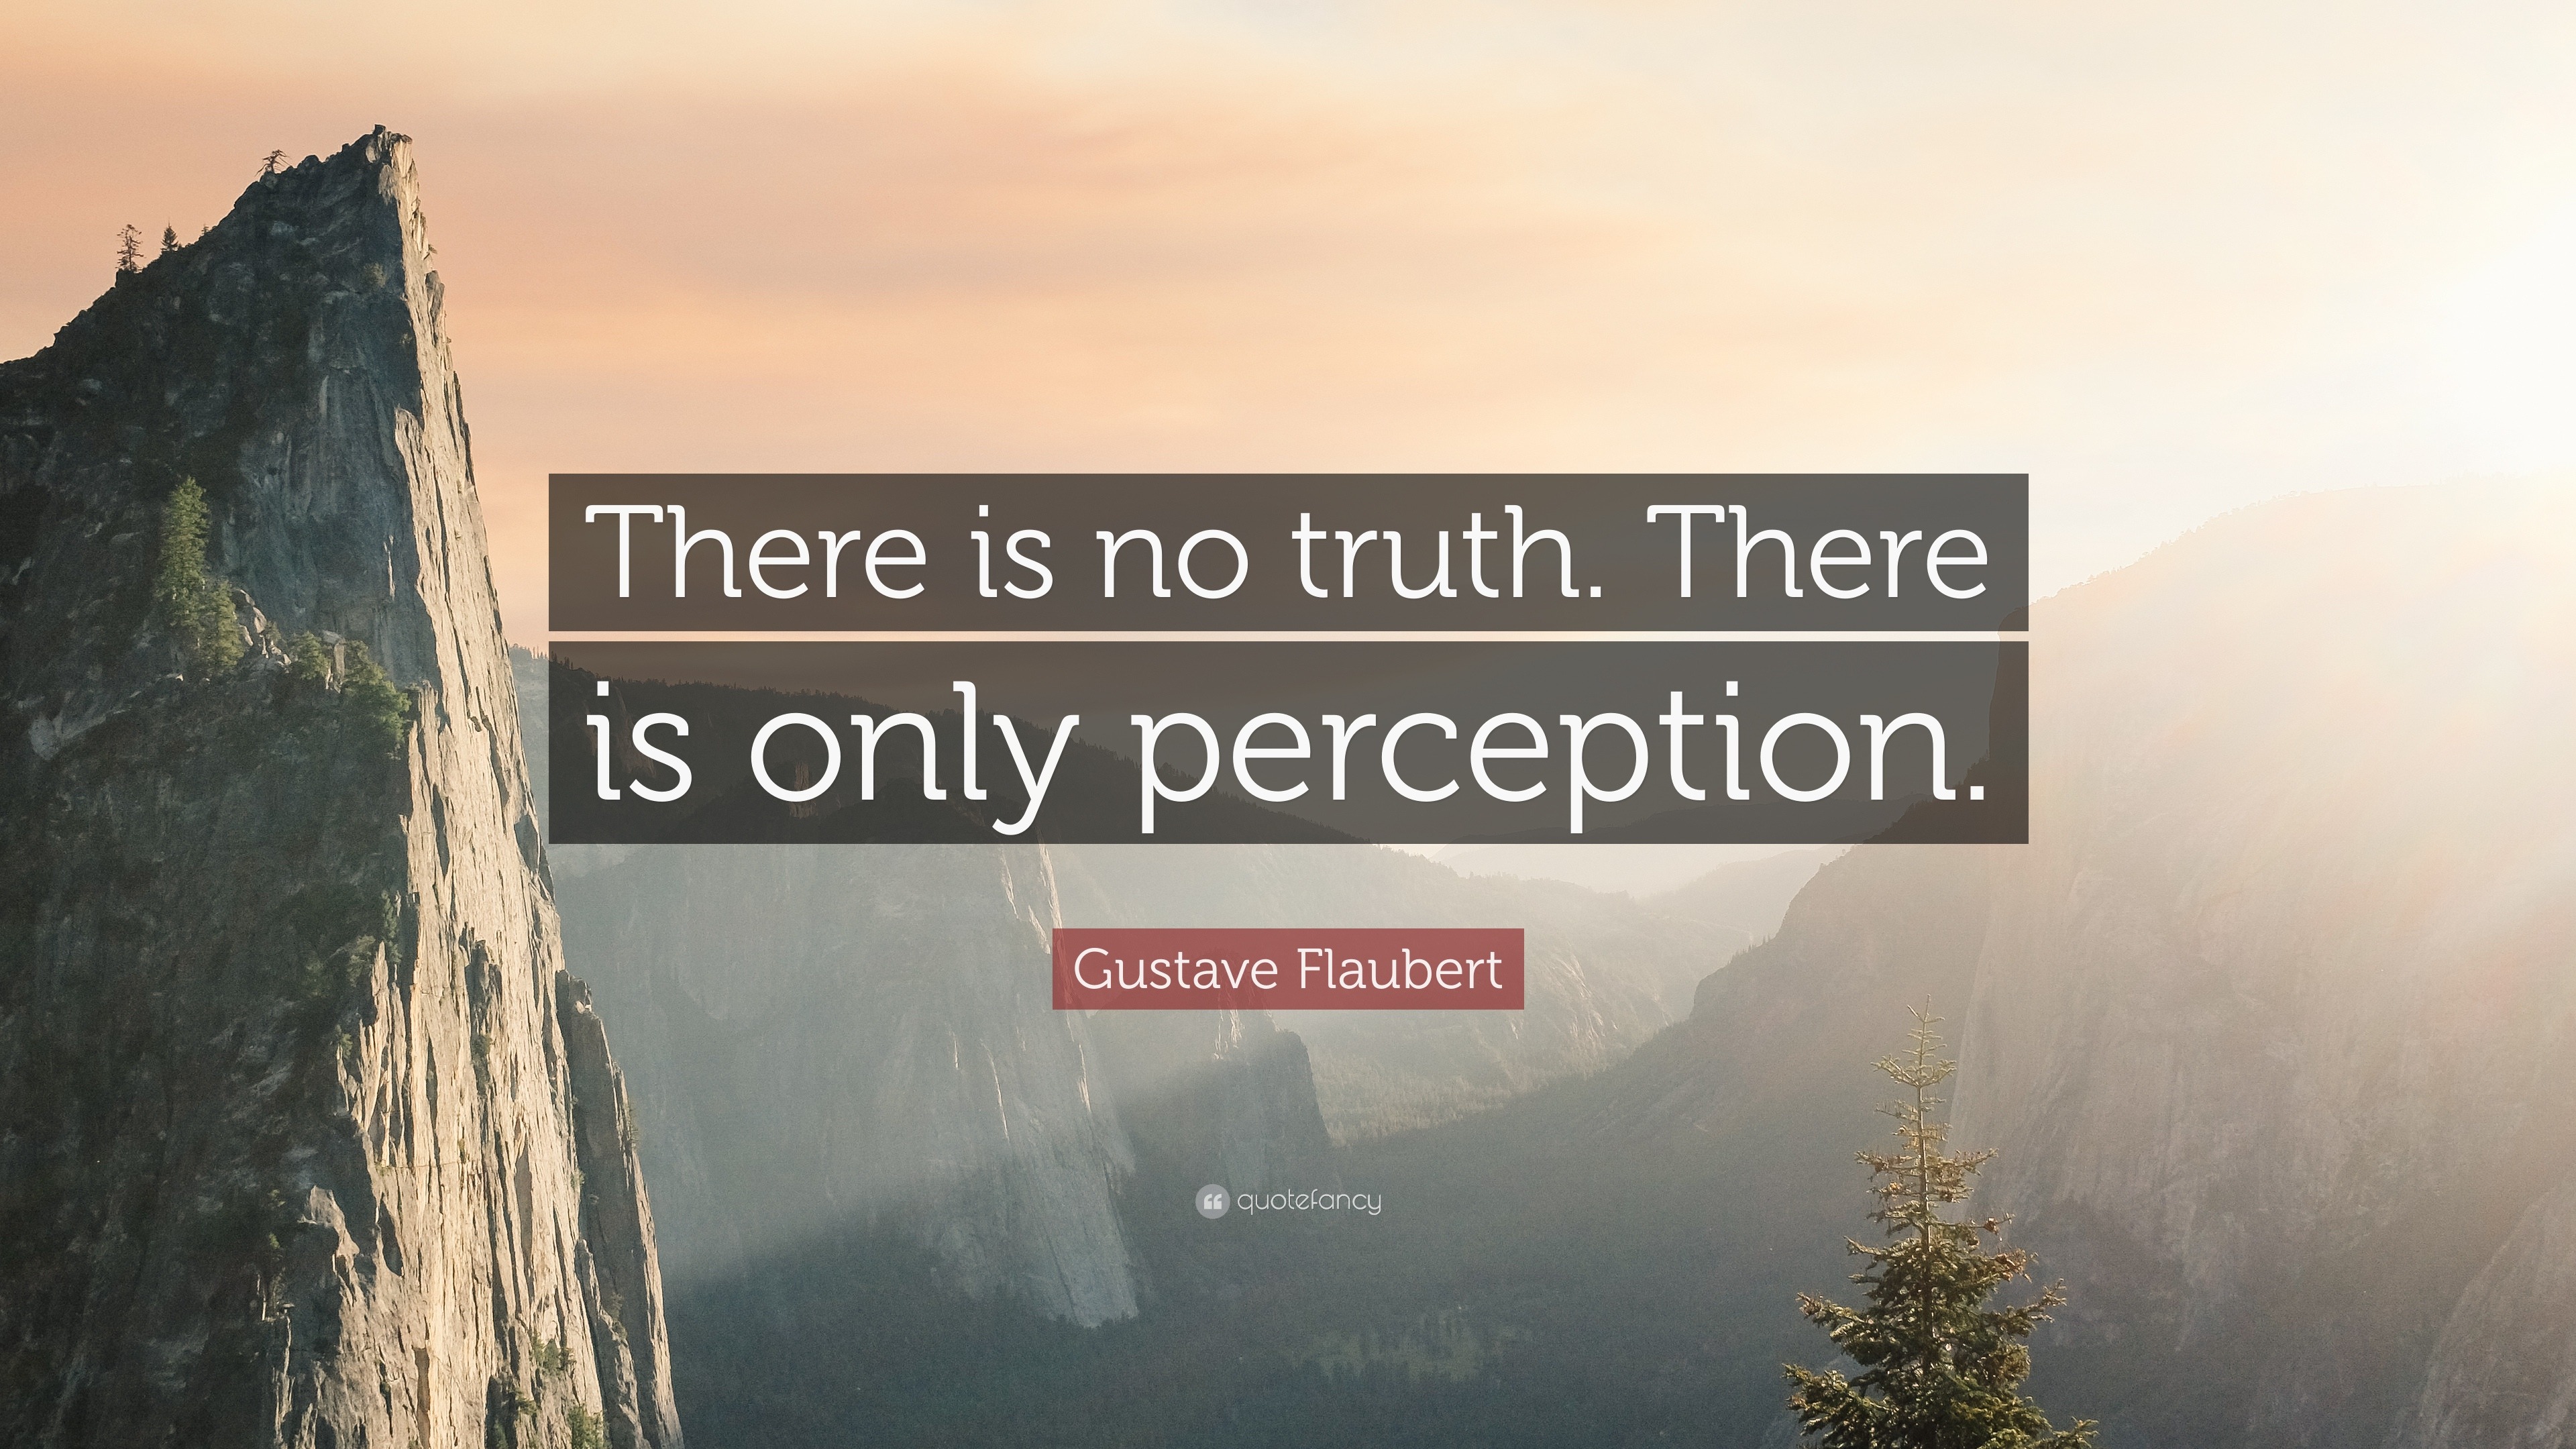 Gustave Flaubert Quote: “There is no truth. There is only perception.”